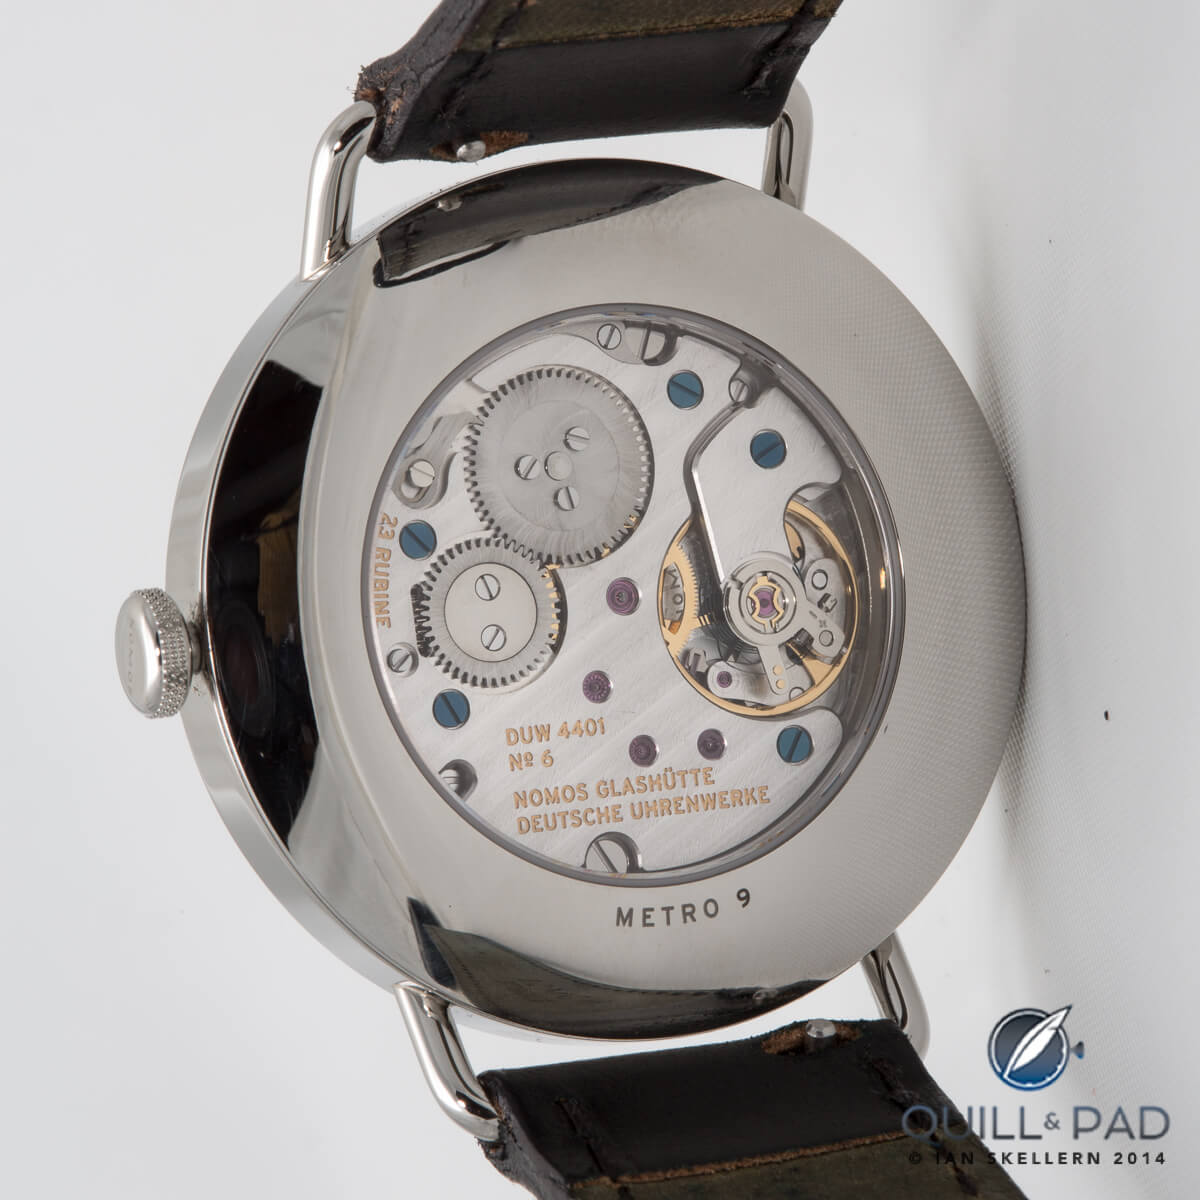 Back of the Nomos Metro with new Swing System escapement